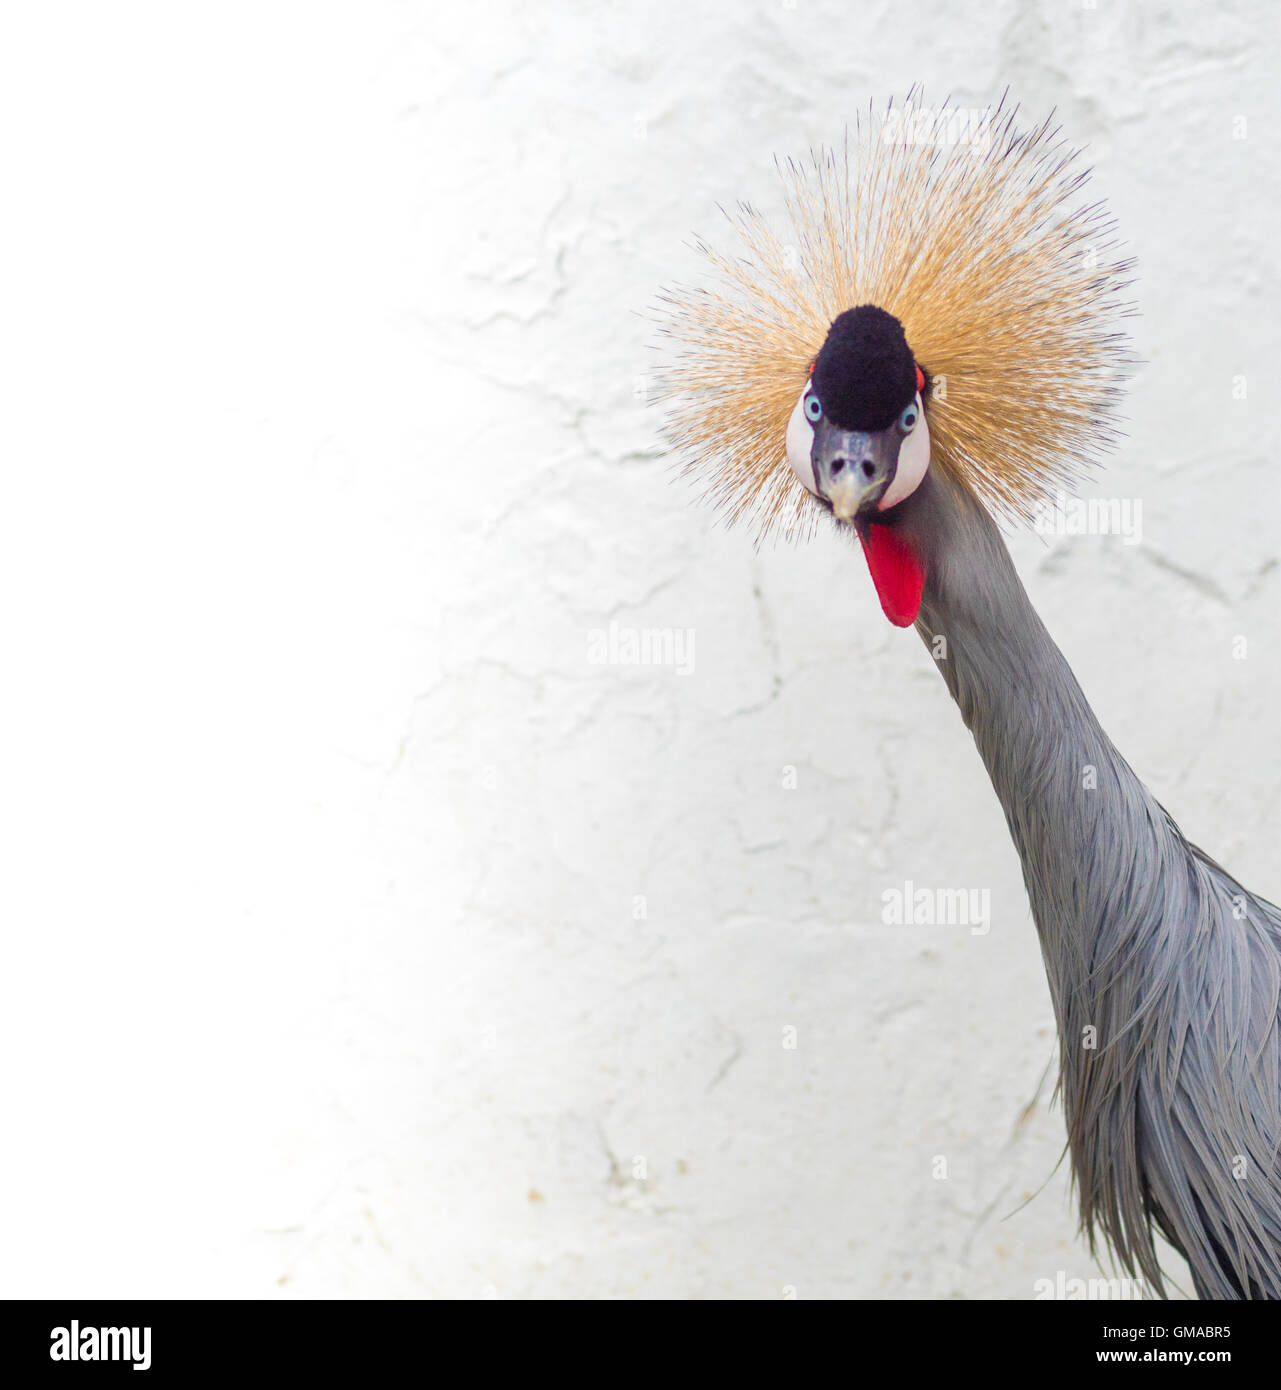 East African Crowned Crane colpo alla testa close up Foto Stock